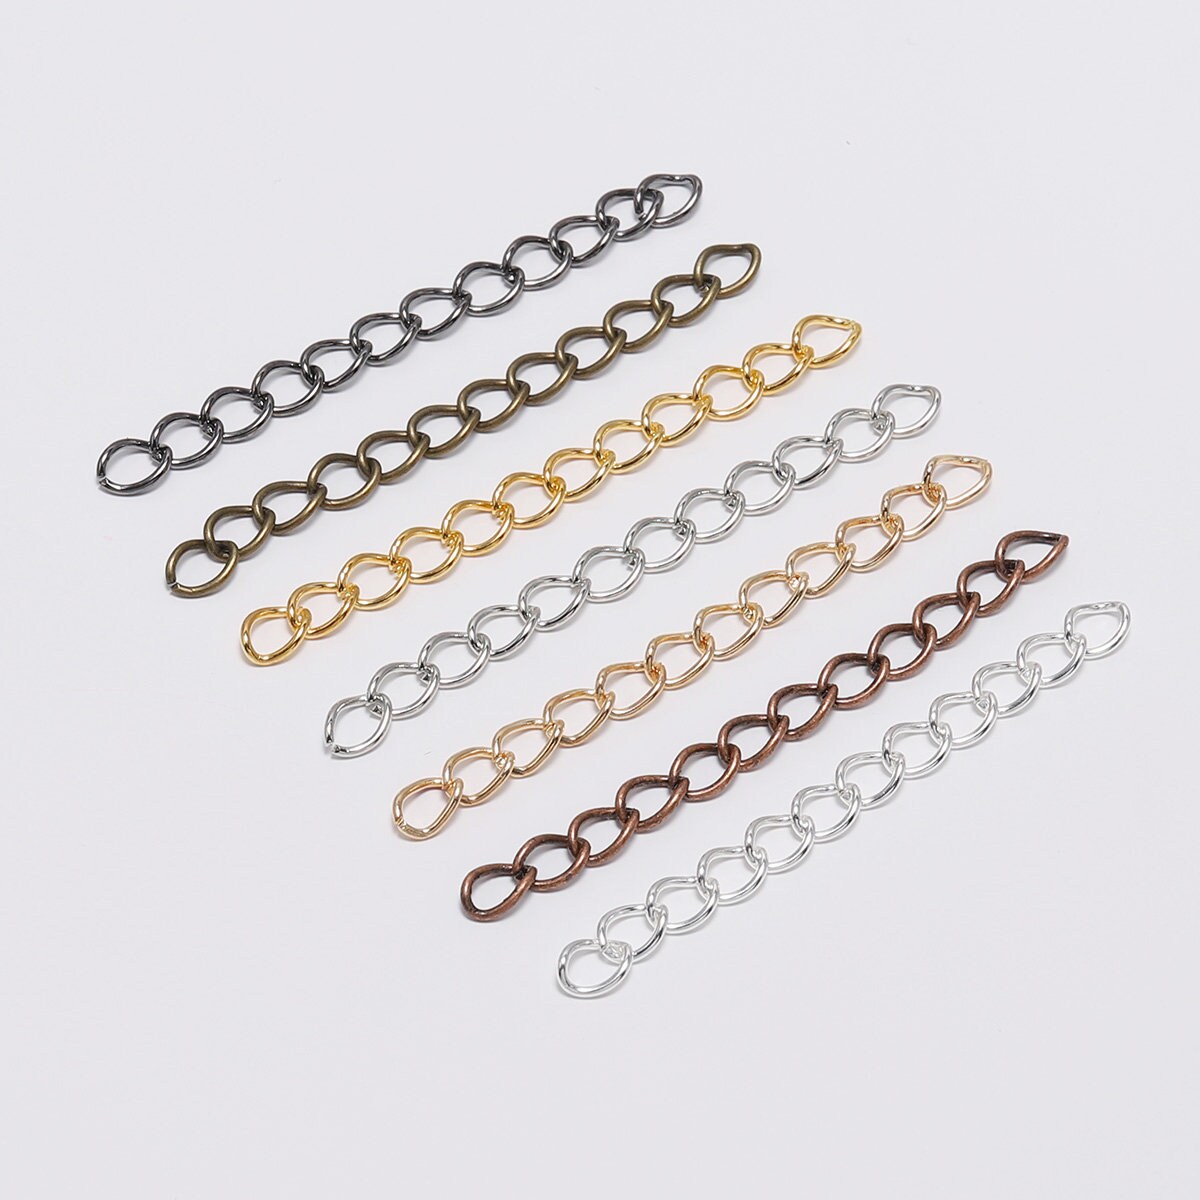 50Pcs/lot 5cm,7cm Stainless Steel Bulk Necklace Extension Chain Tail  Extender Bracelet Chains for Jewelry Making Supplies Findings (50mm*50pcs)